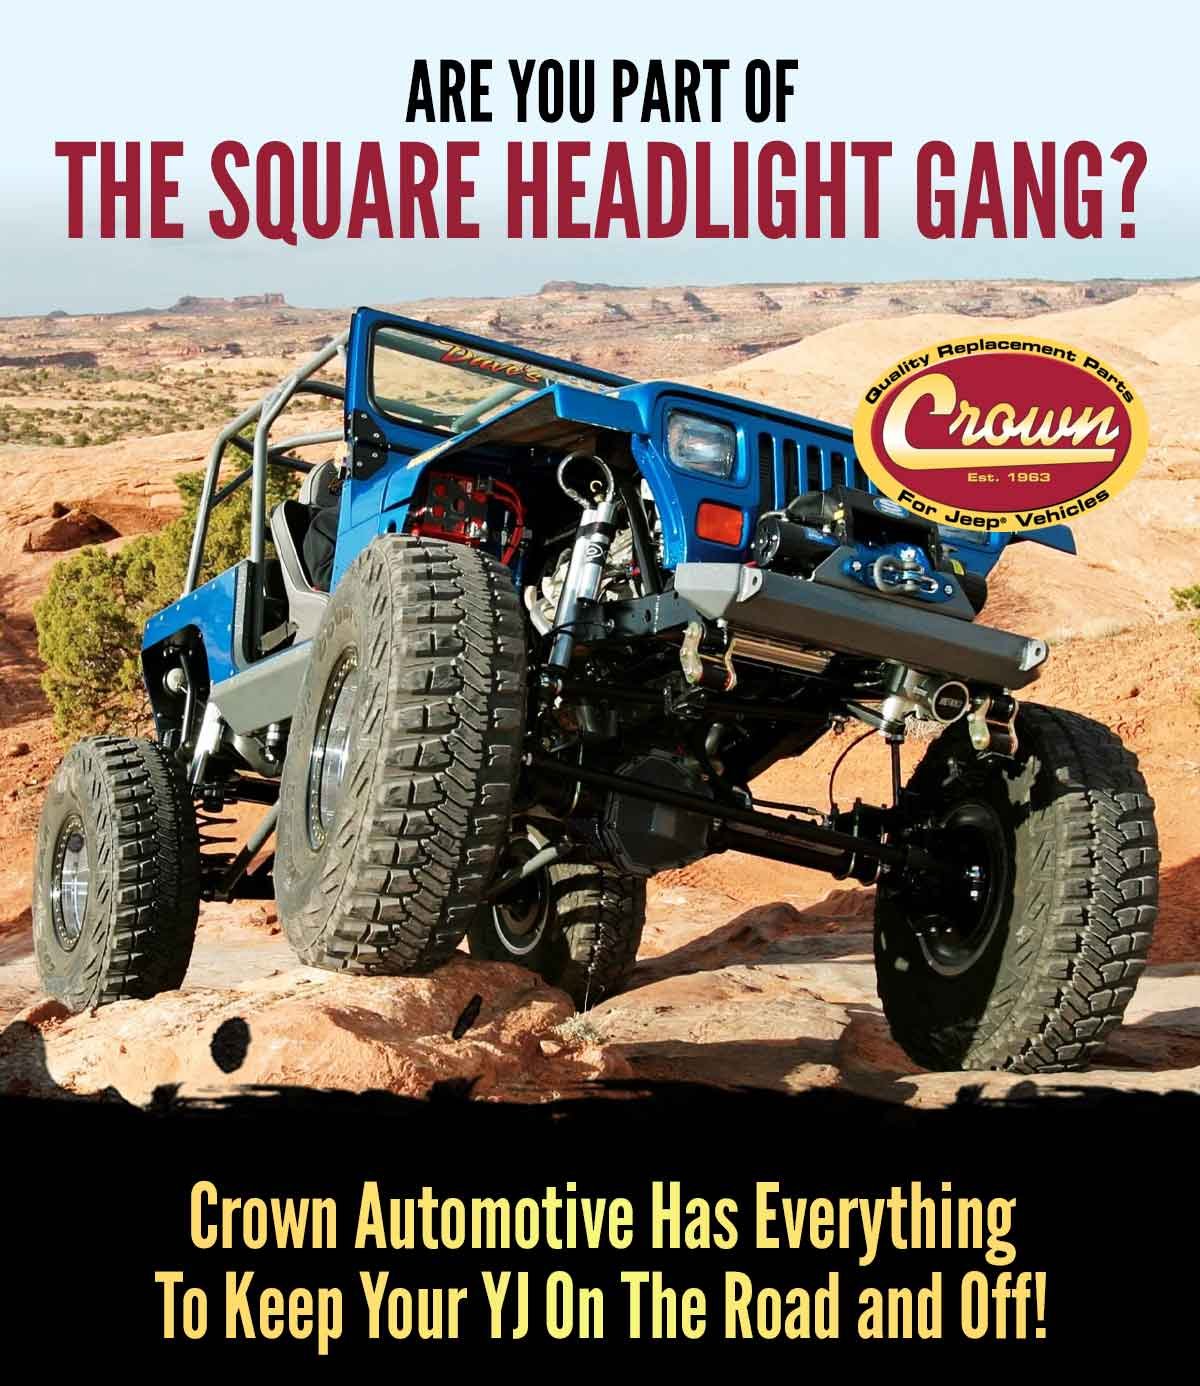 Are You Part Of The Square Headlight Gang? Crown Automotive Has Everything To Keep Your YJ On The Road and Off!